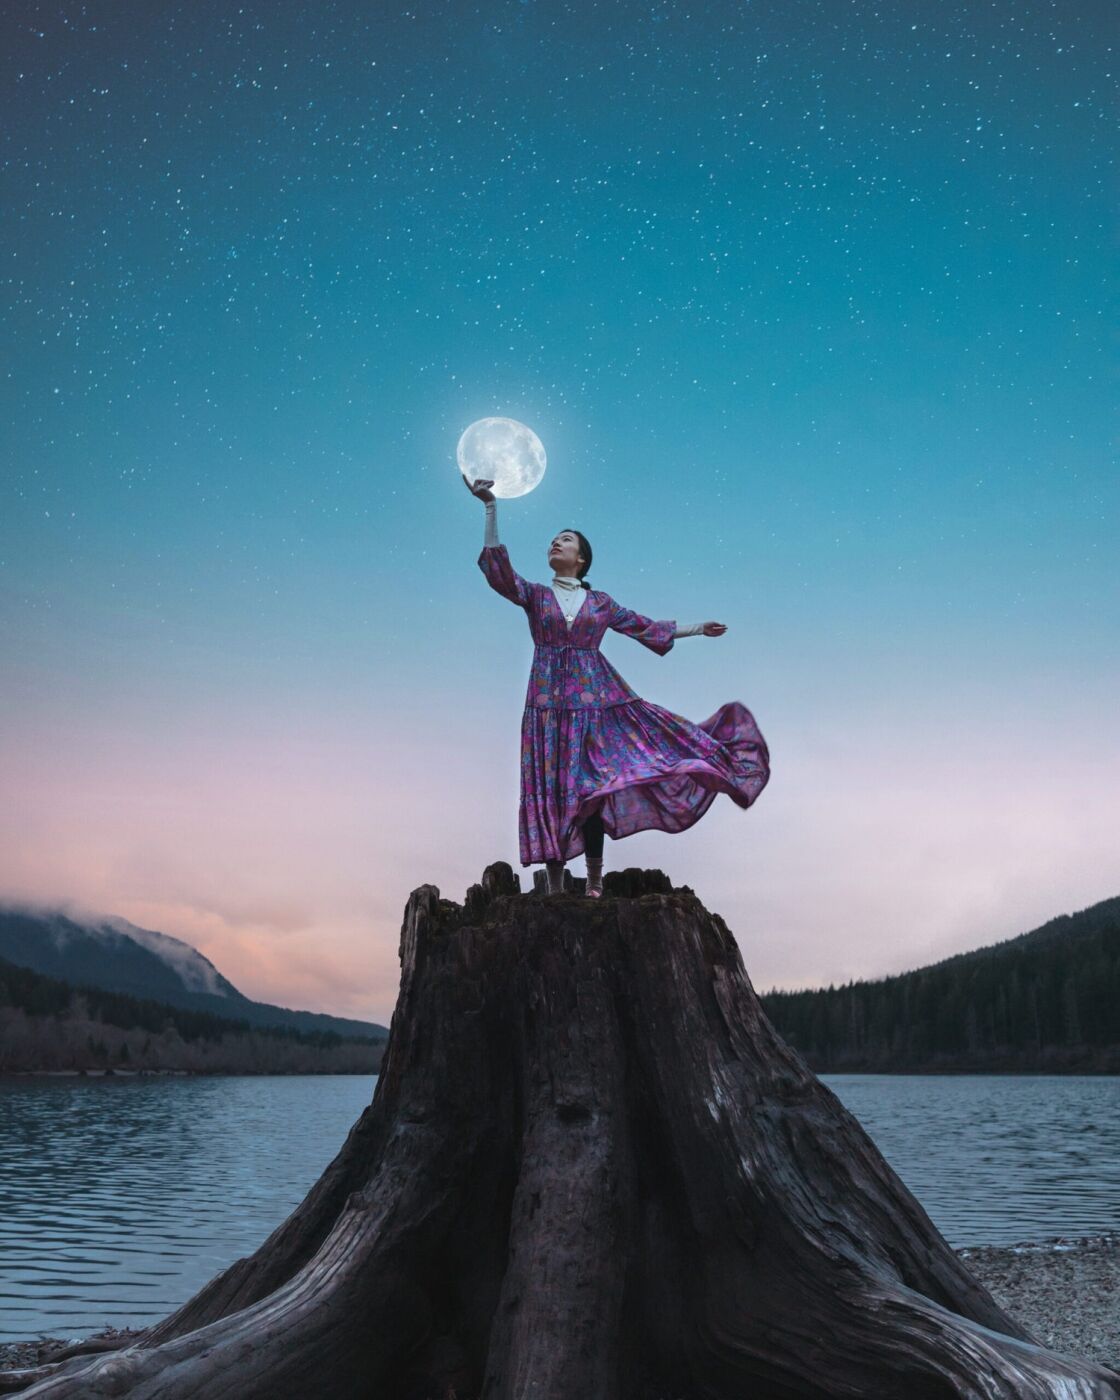 Photoshop edit of a girl holding up the moon